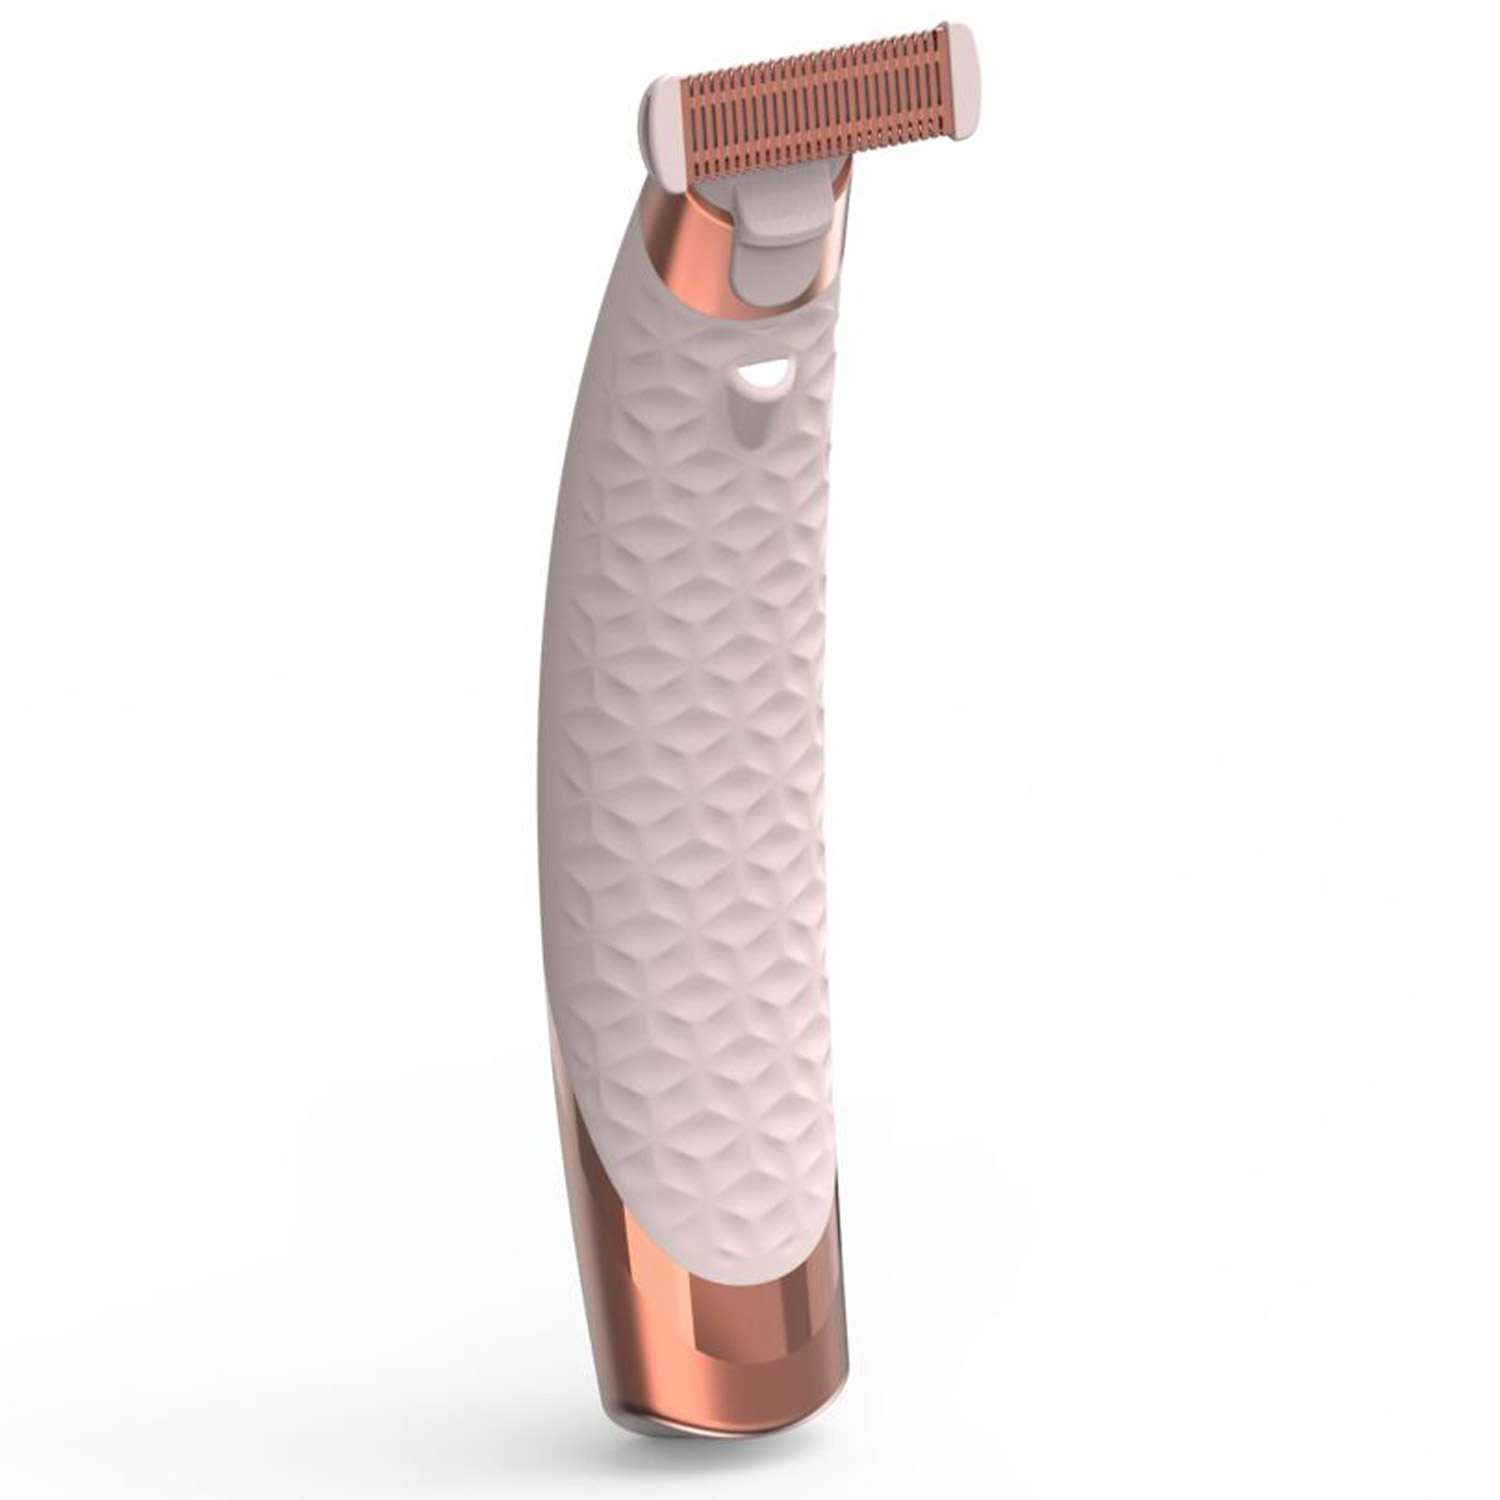 flawless touch razor reviews